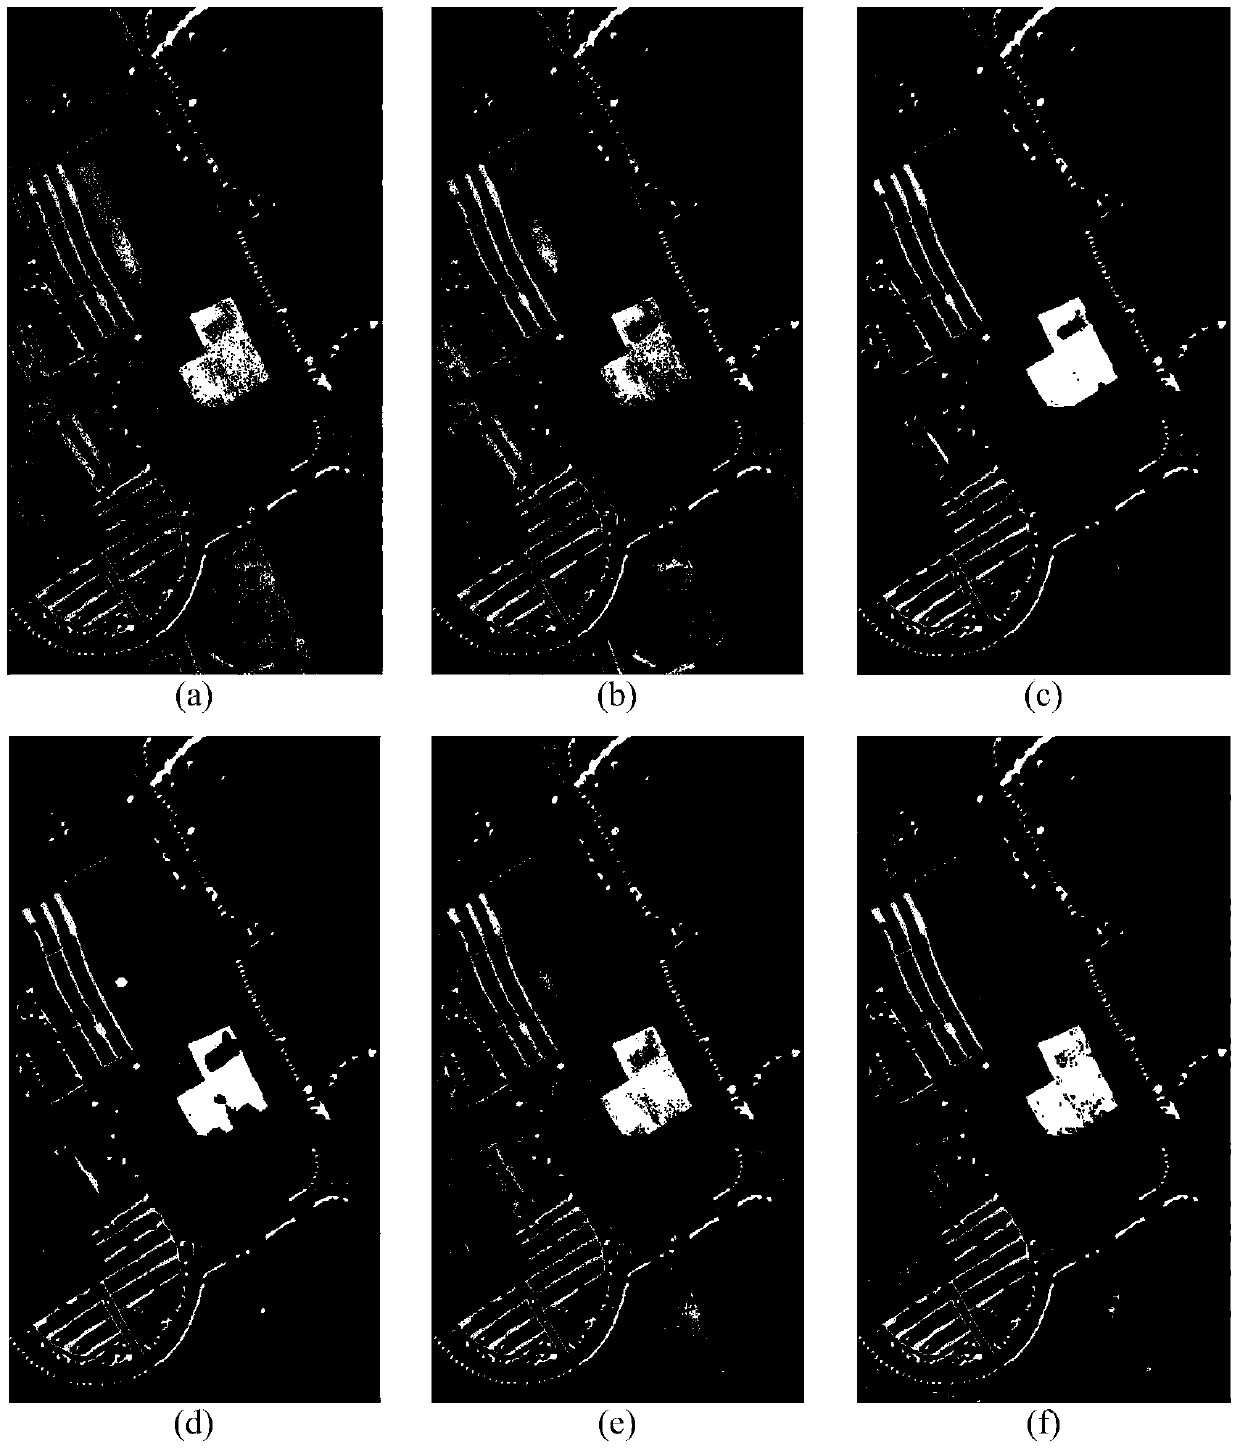 Hyperspectral Image Classification Method Based on Ridgelet and Deep Convolutional Networks